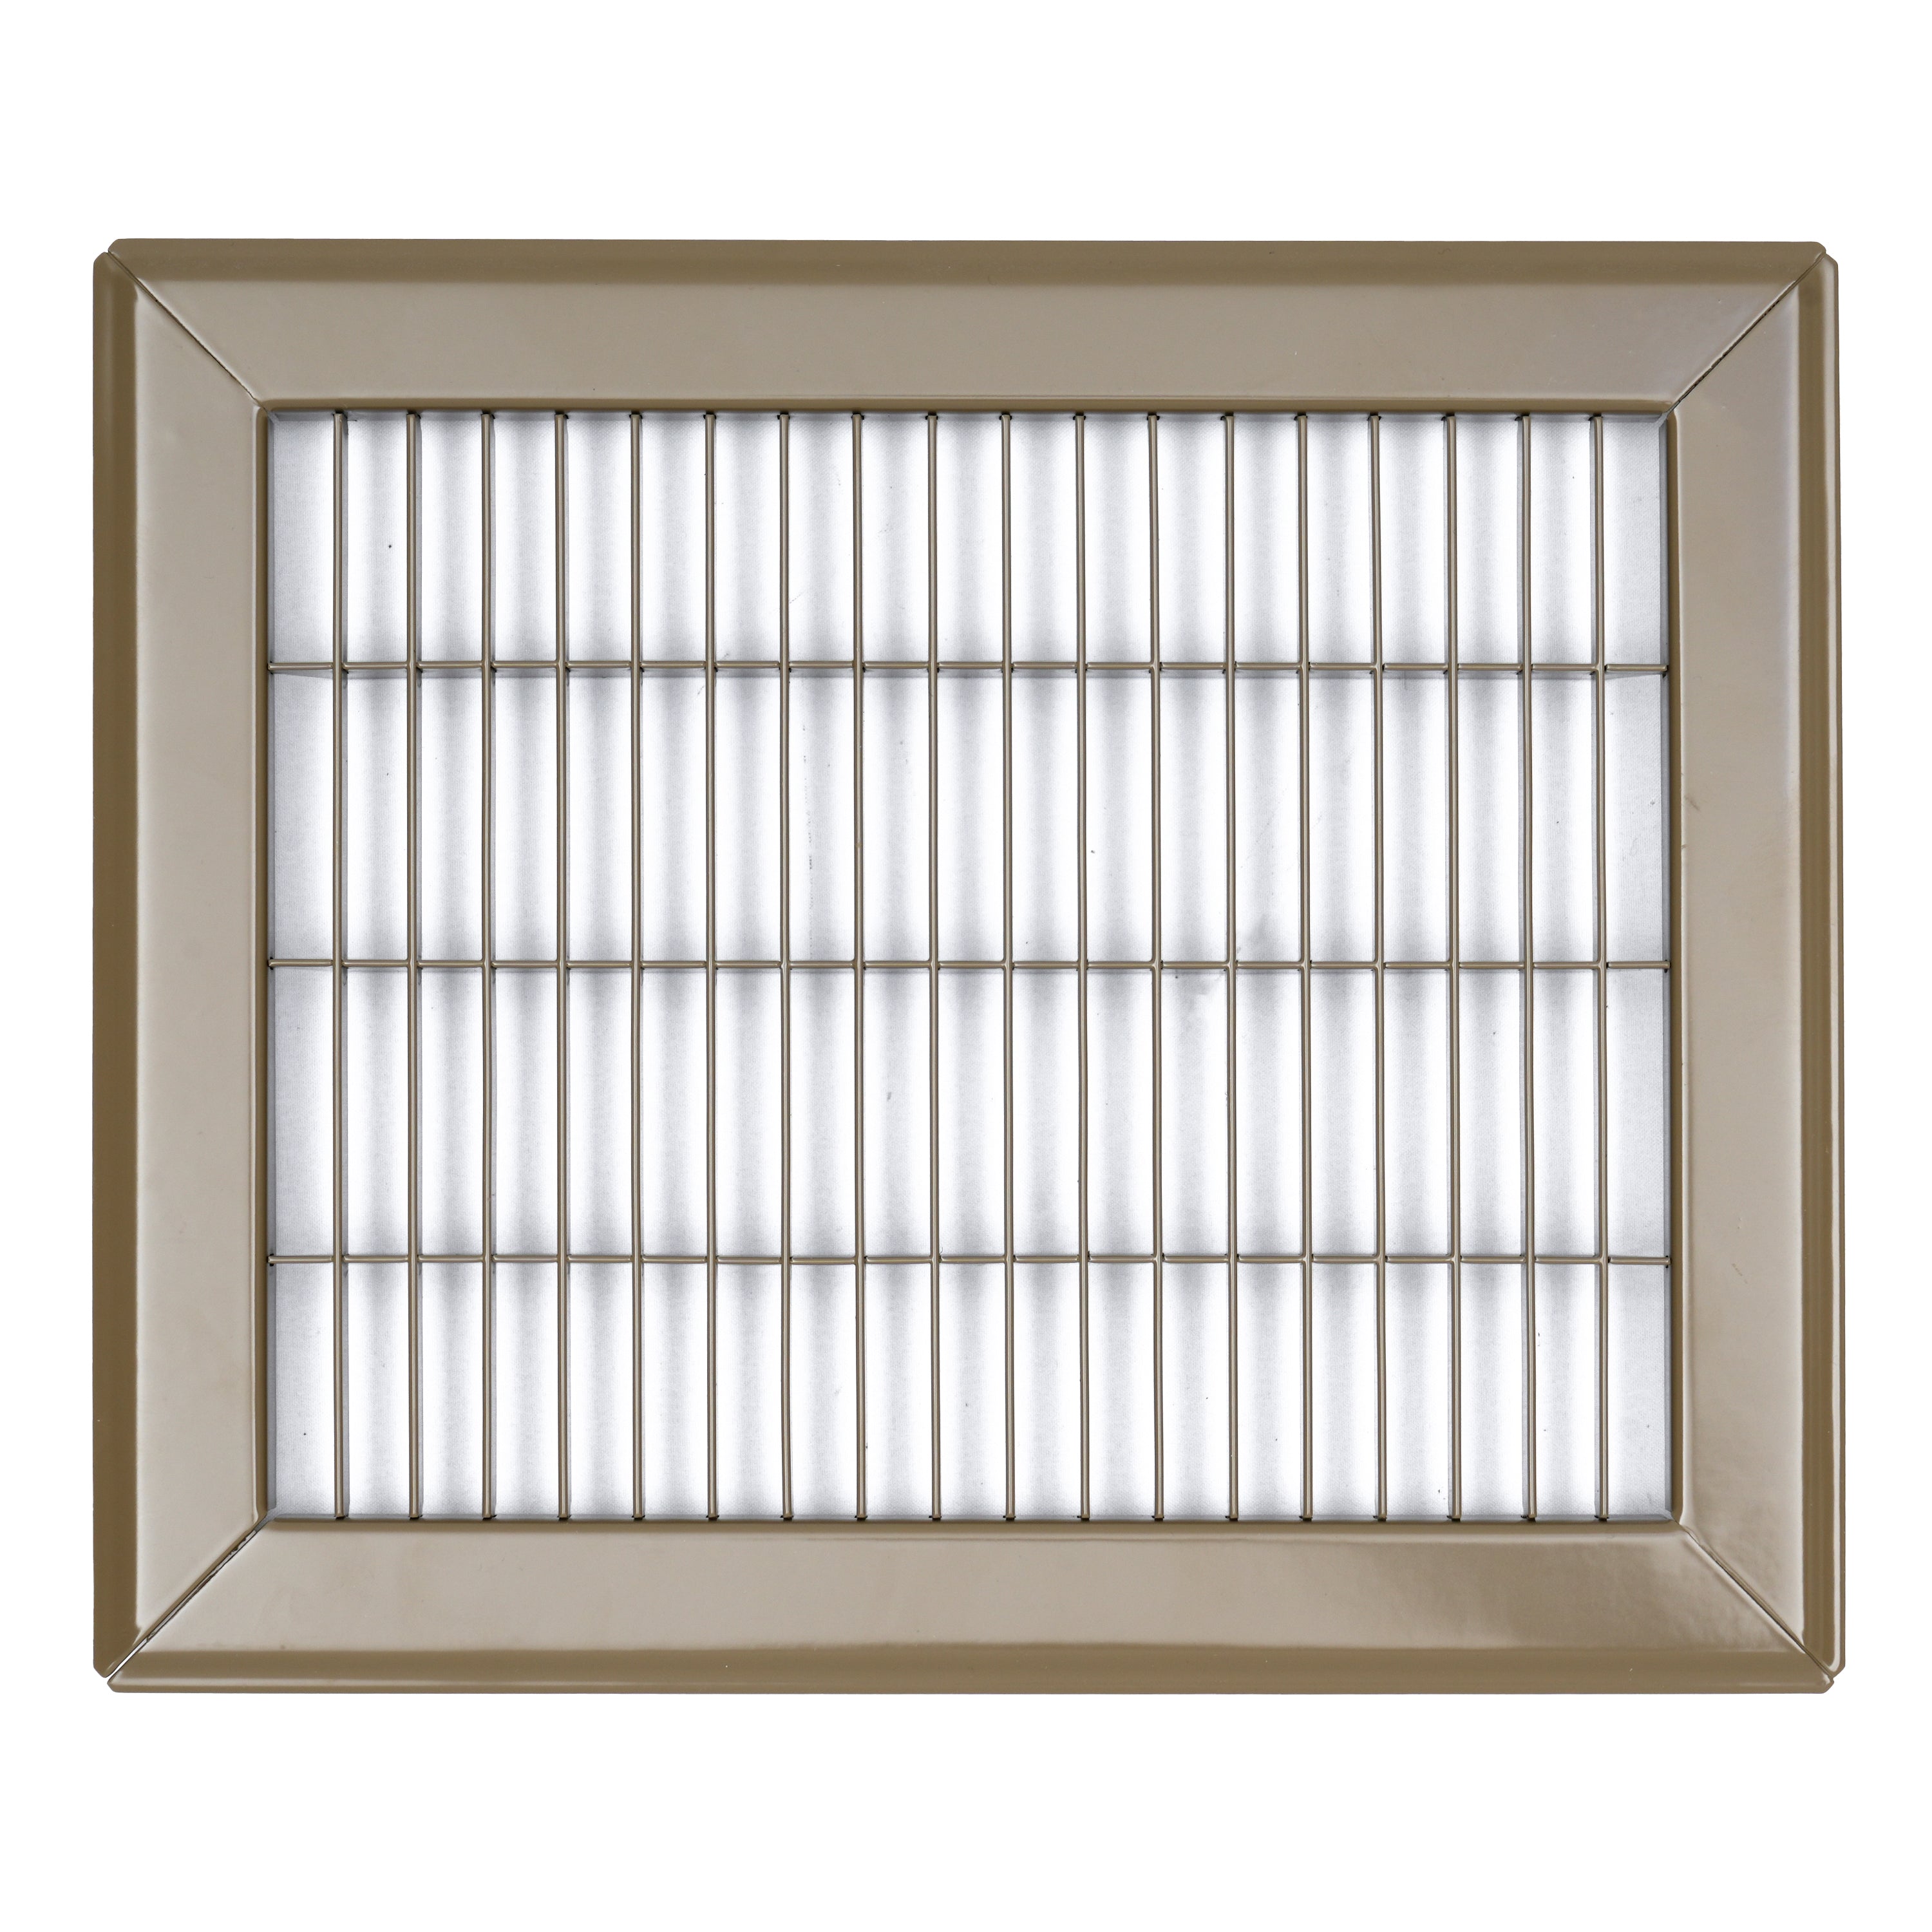 8"W x 10"H [Duct Opening] Return Air Floor Grille | Vent Cover Grill for Floor - Brown| Outer Dimensions: 9.75"W X 11.75"H